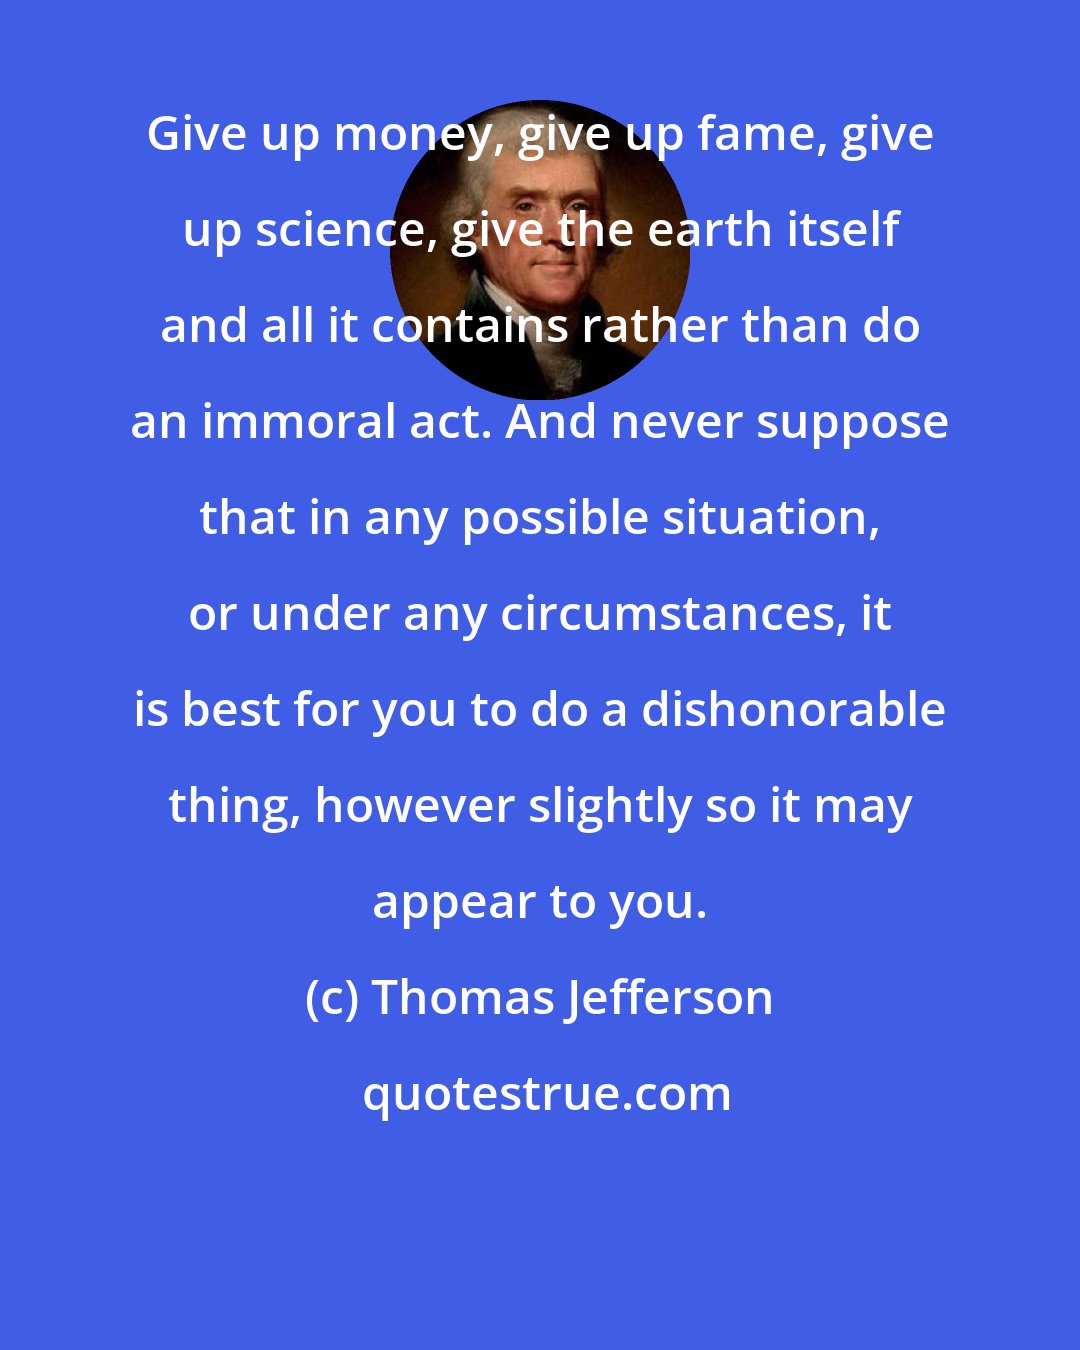 Thomas Jefferson: Give up money, give up fame, give up science, give the earth itself and all it contains rather than do an immoral act. And never suppose that in any possible situation, or under any circumstances, it is best for you to do a dishonorable thing, however slightly so it may appear to you.